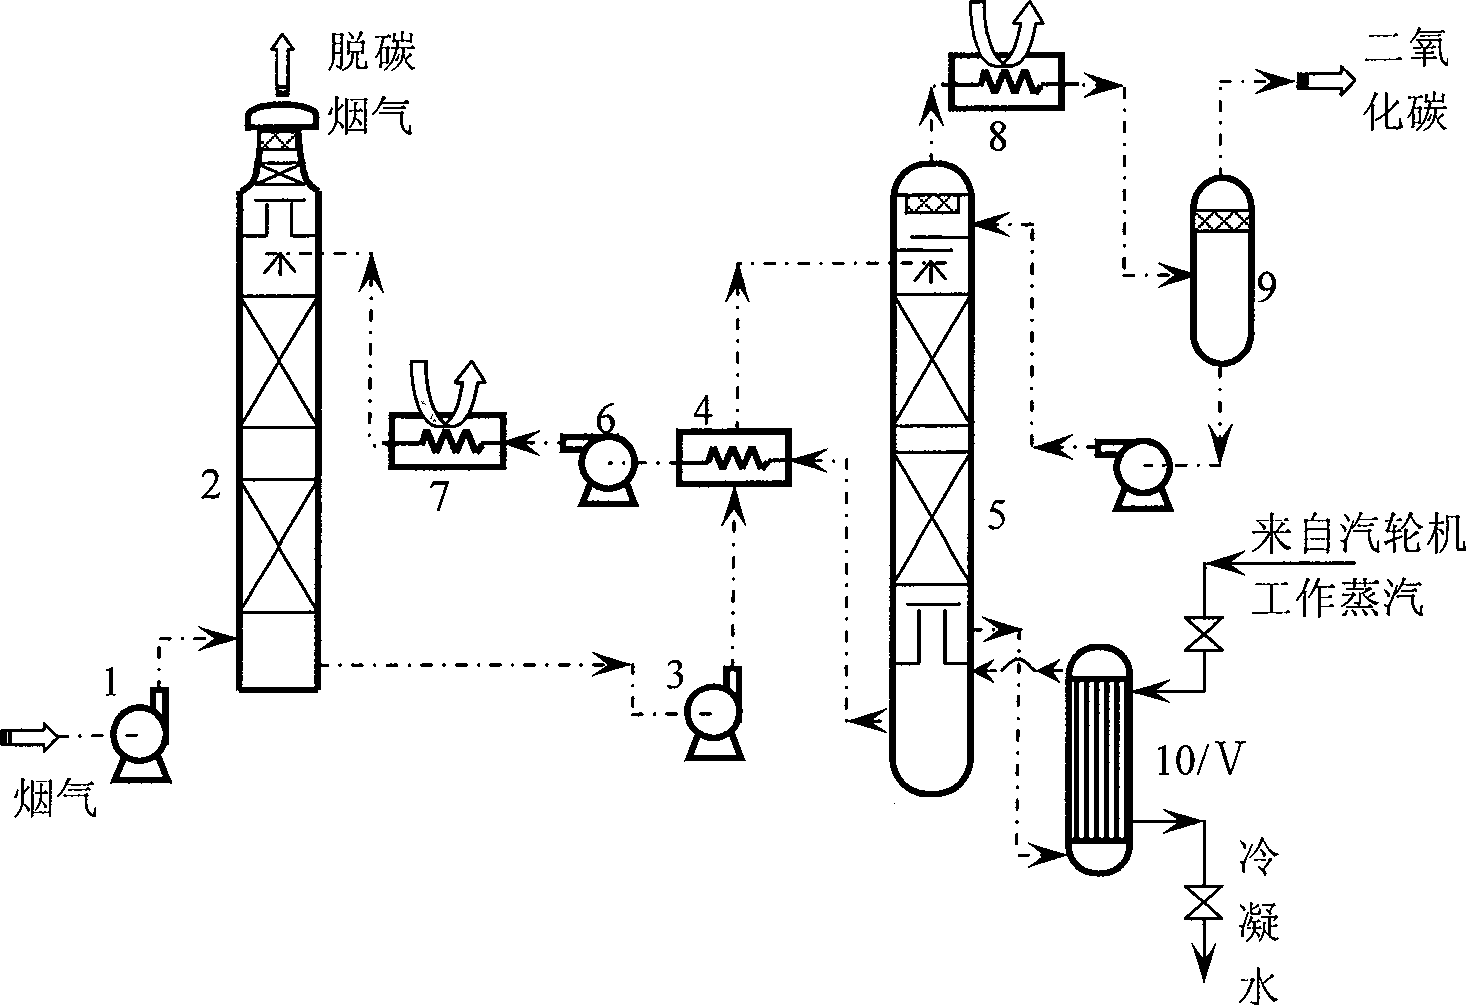 Steam-exhaust coagulation heat recovery system of coal-fired power plant